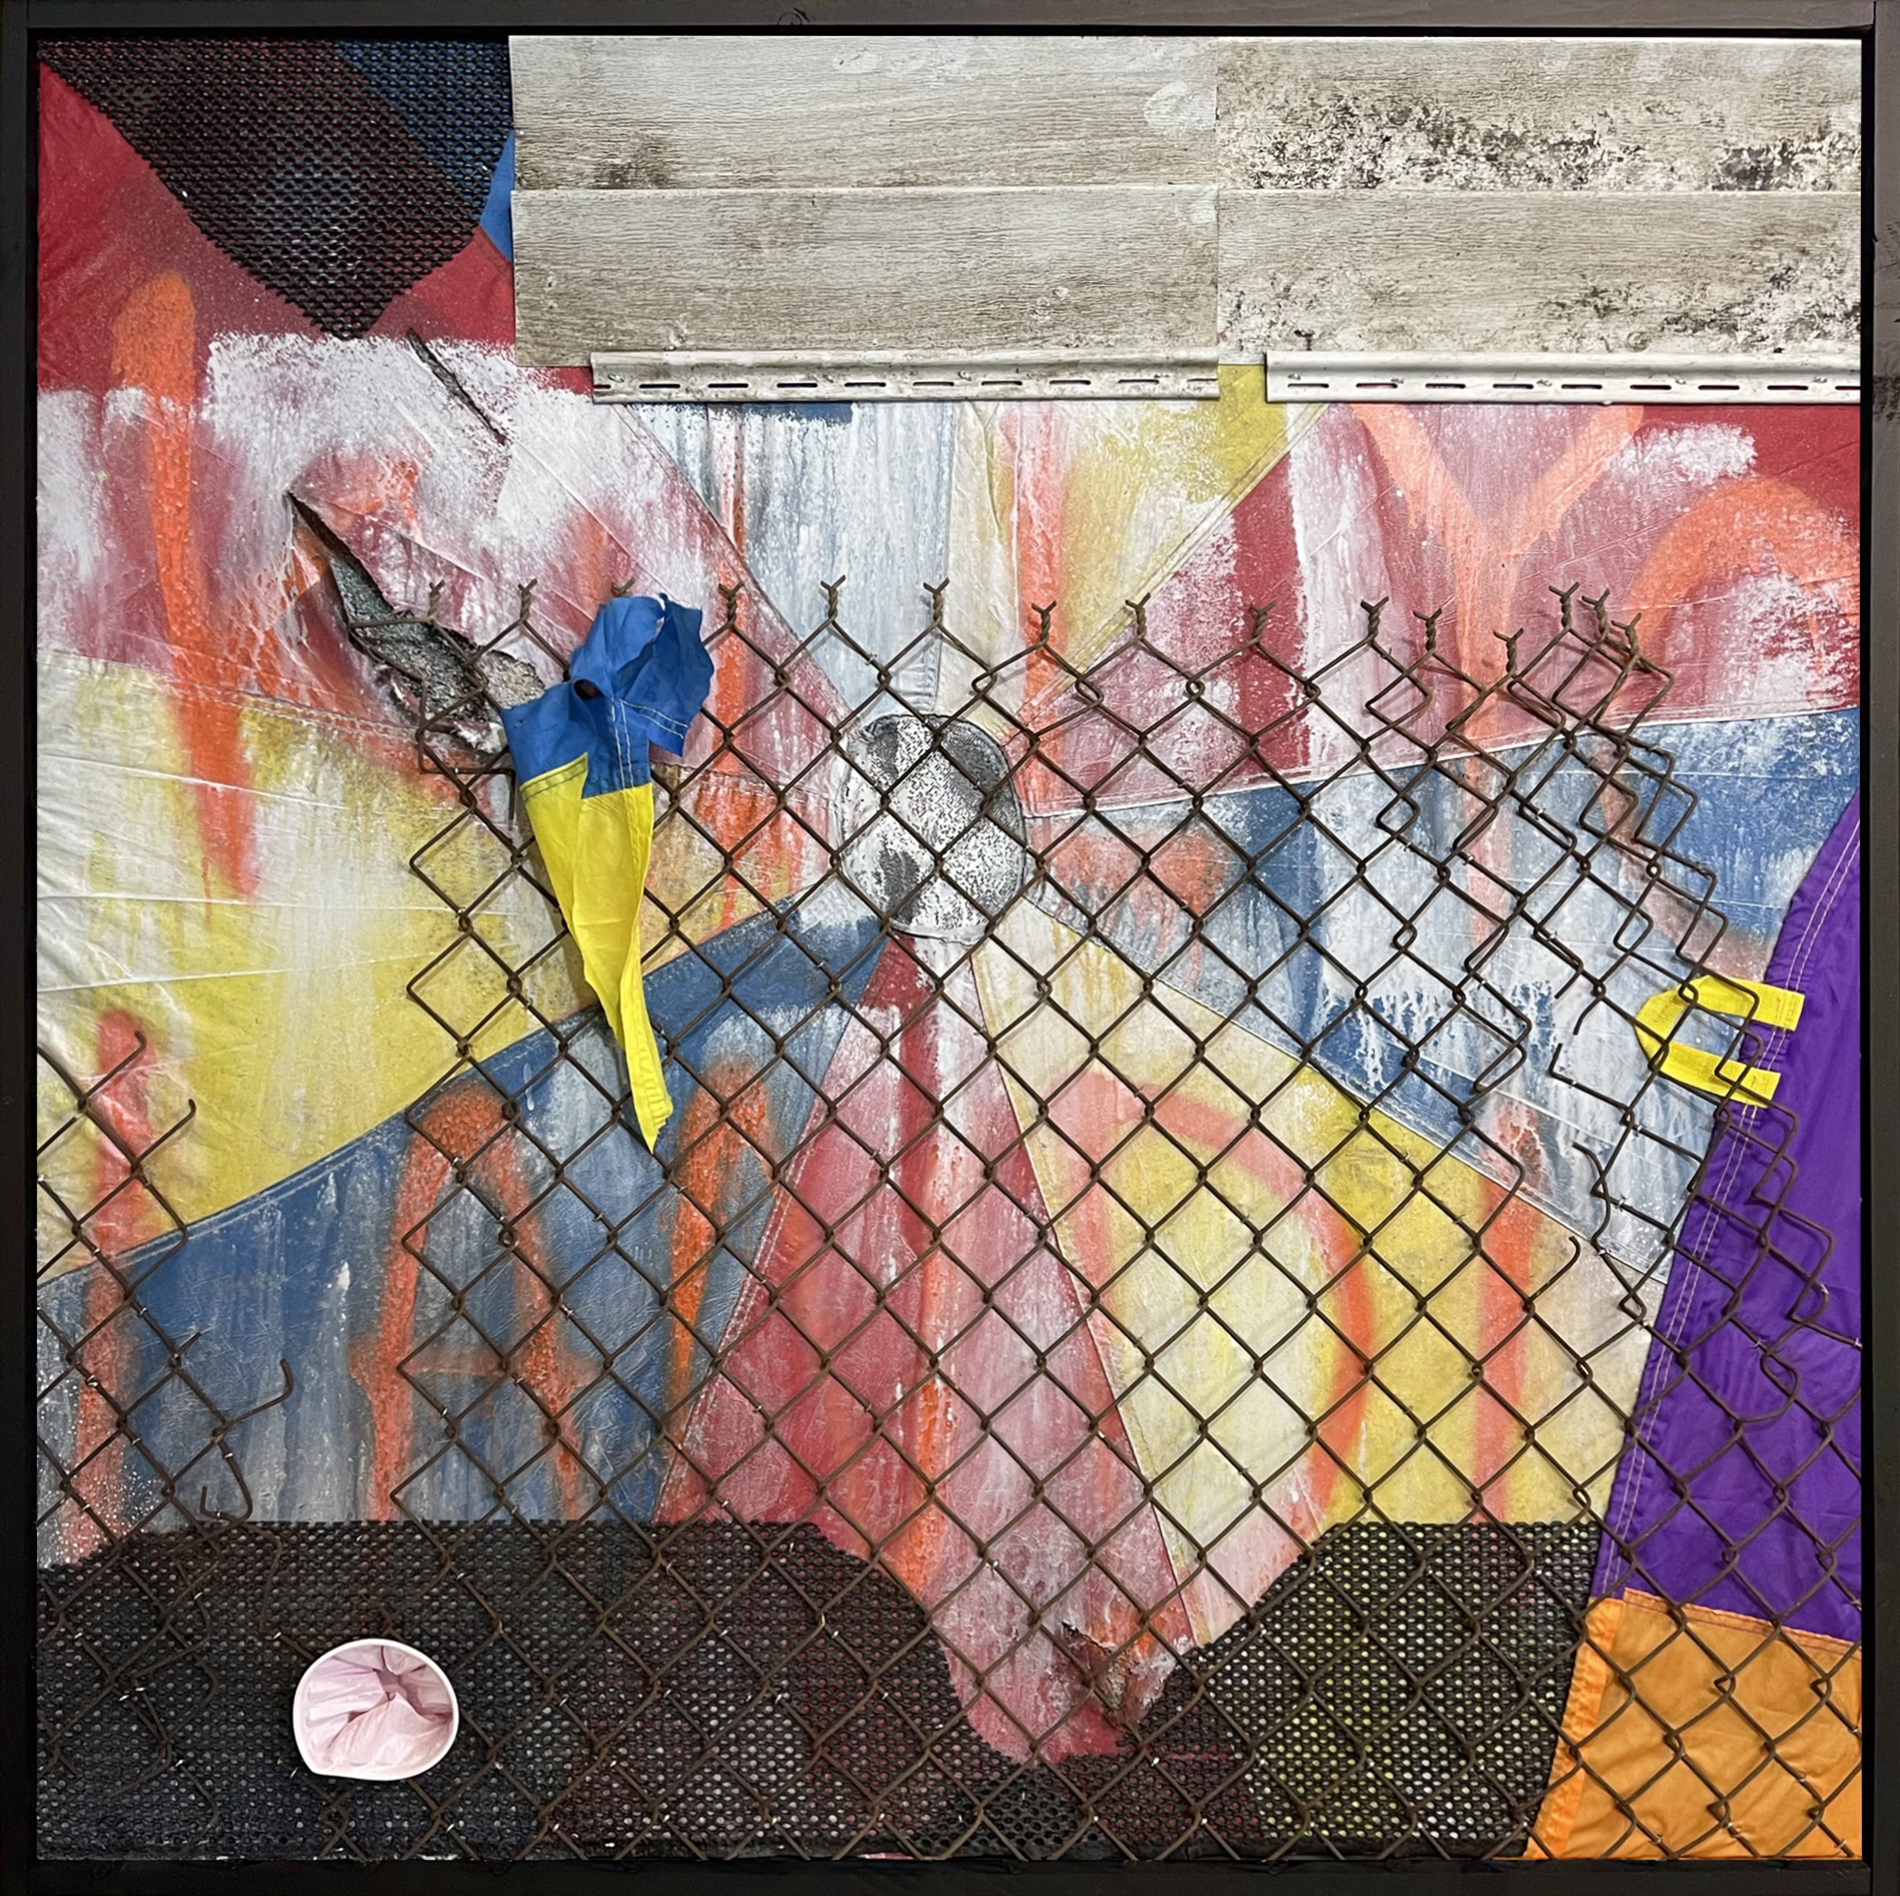 Kill Your Landlord, by Aaron Coleman. A mixed media assemblage made from commercial fencing, salvaged tarps and siding, and gym parachutes.